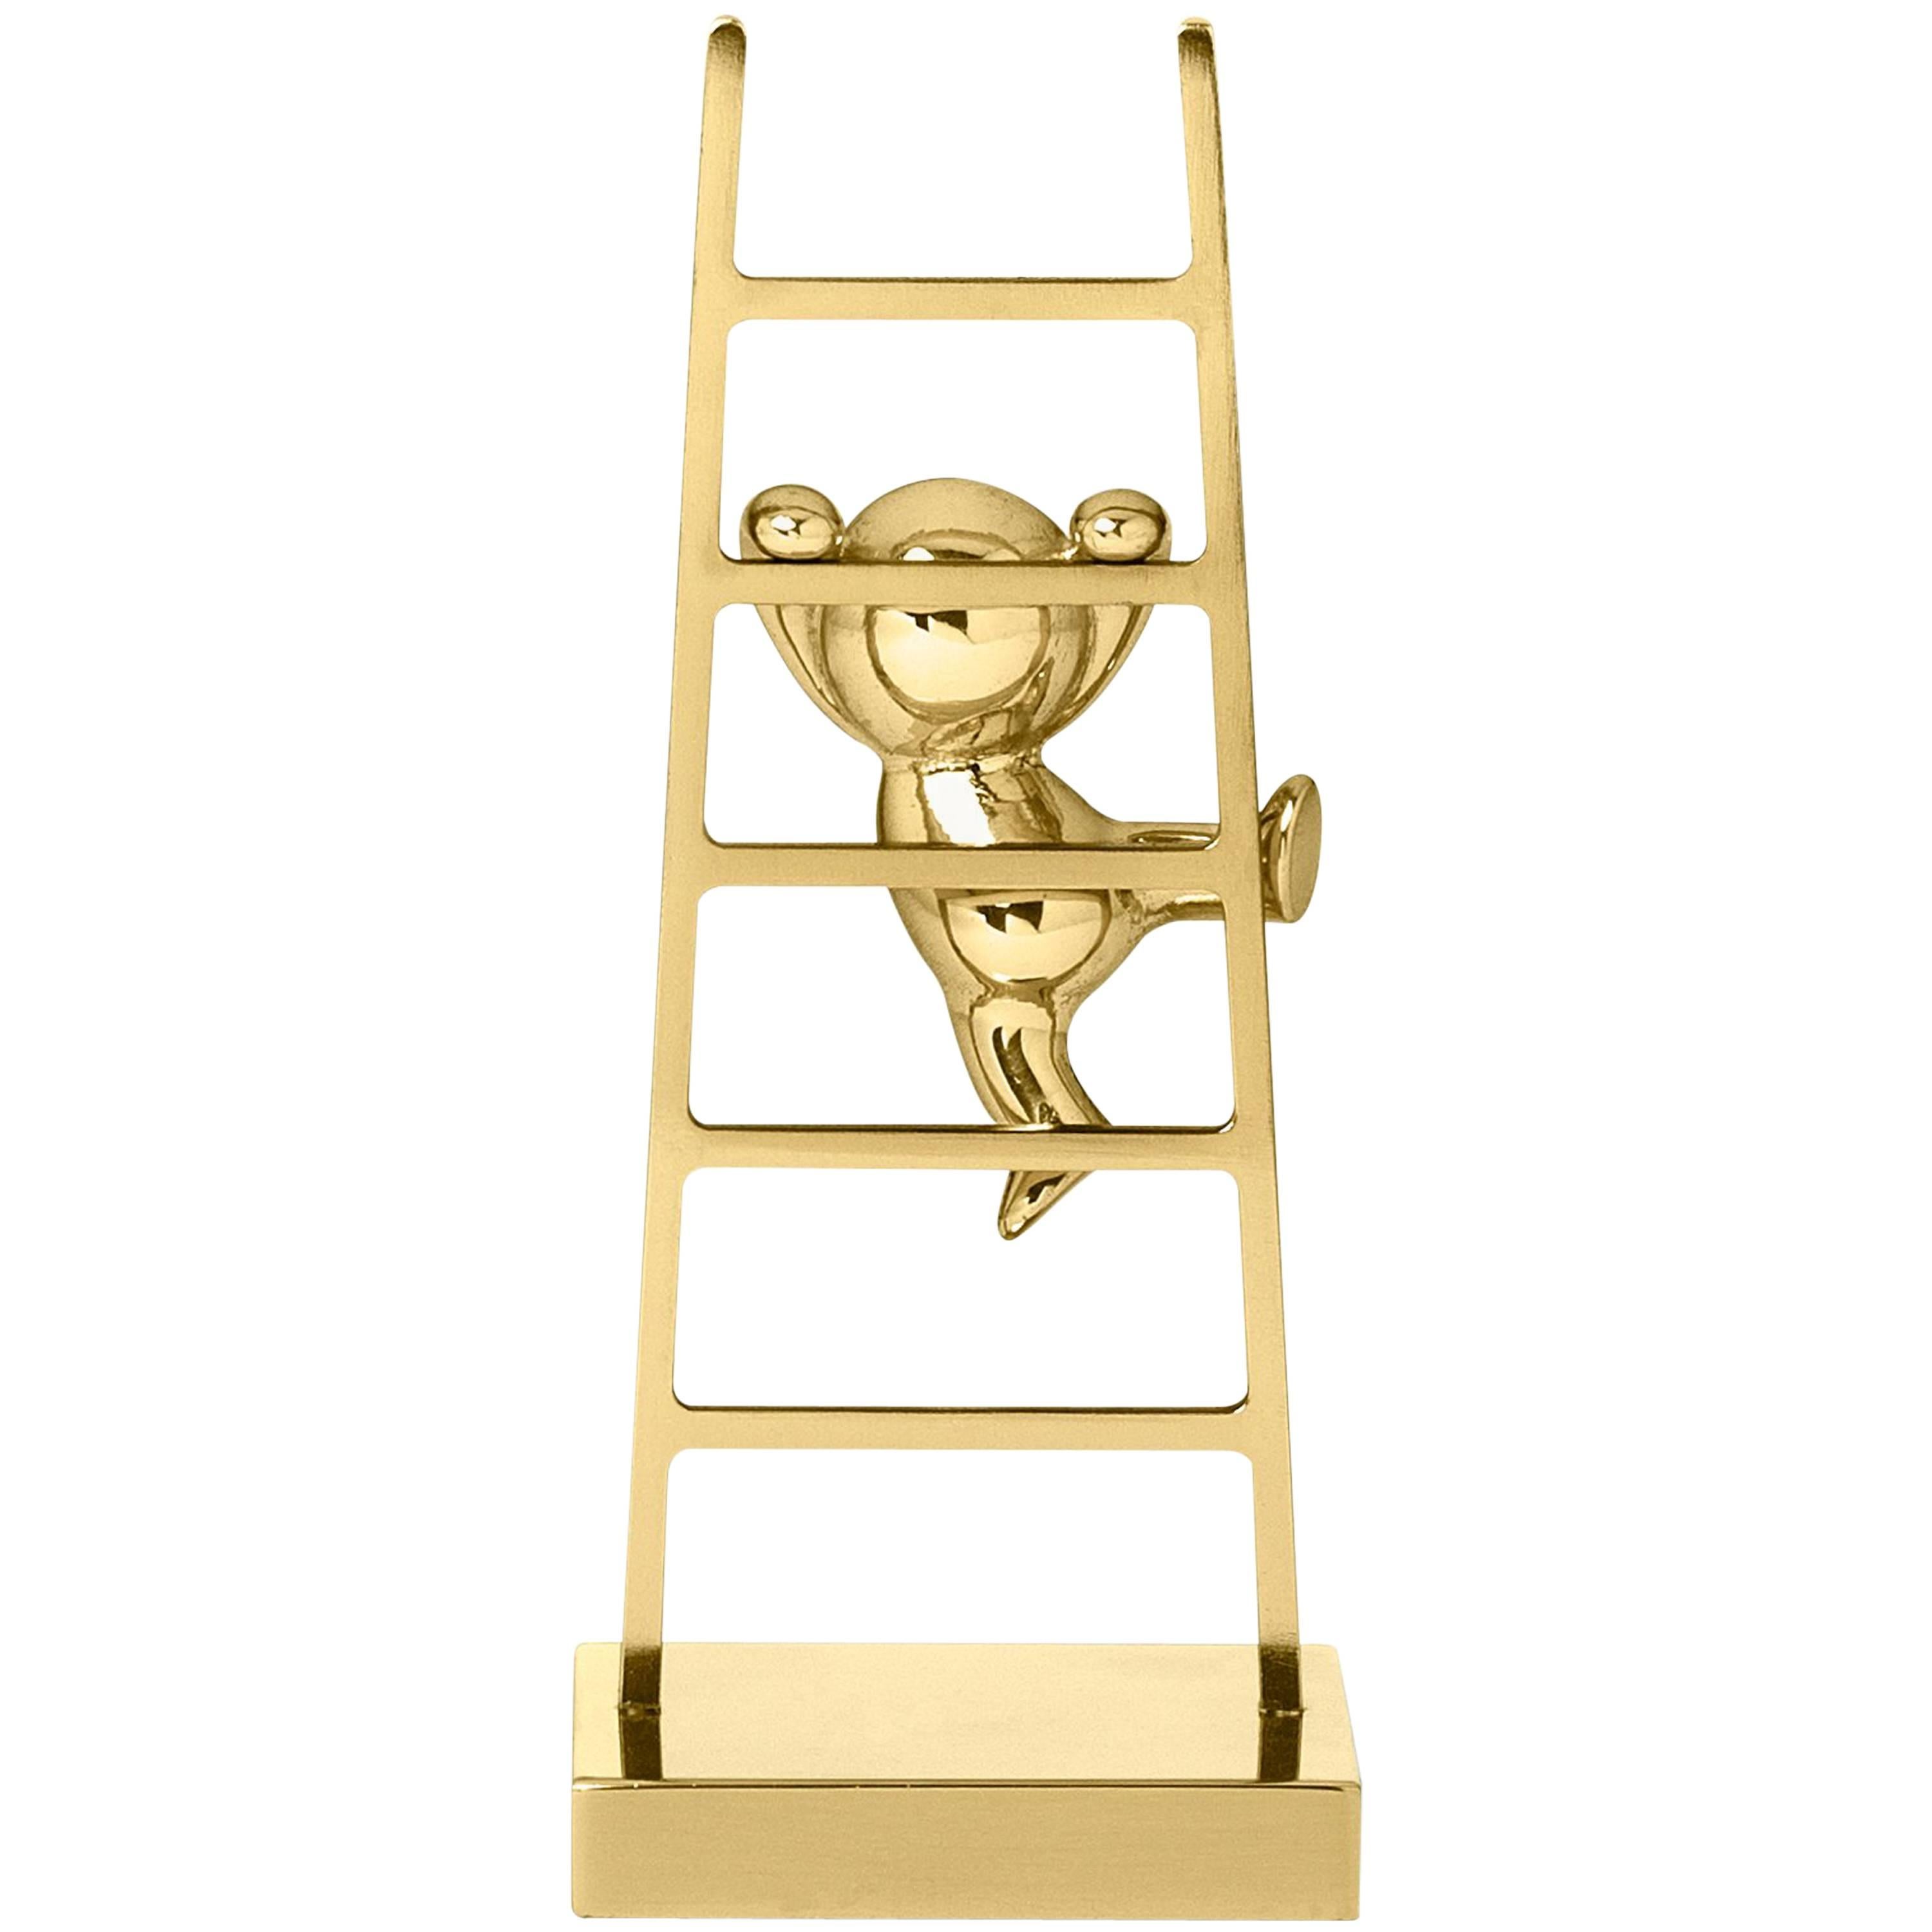 Ghidini 1961 Omini the Climber Clips Holder in Polished Brass